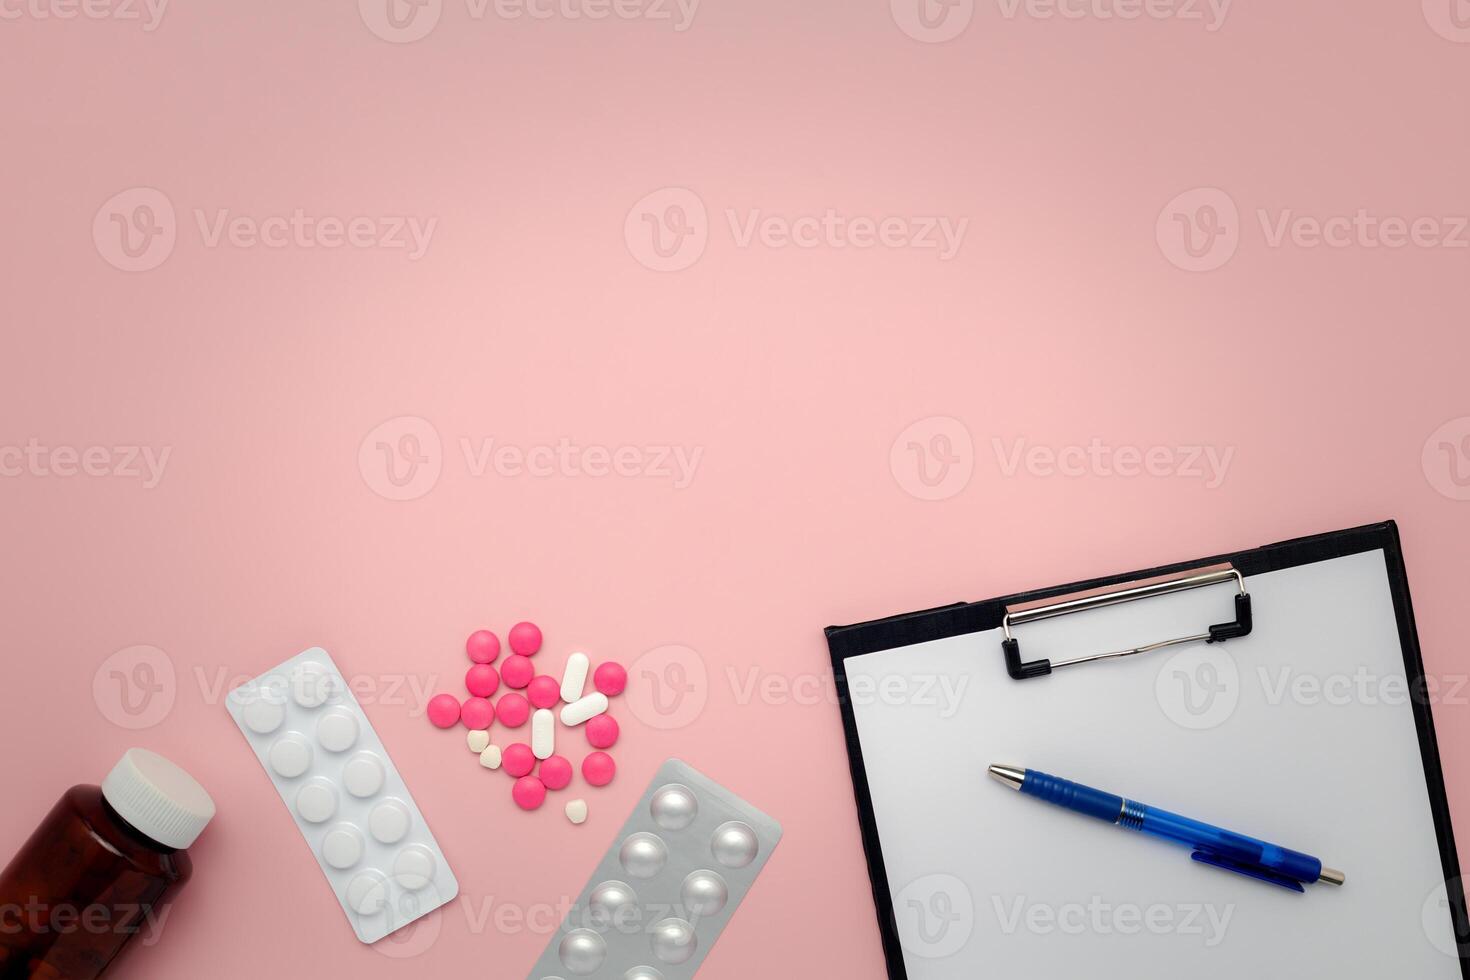 A bottle of medicine, medication blister packs, pills, clipboard and pen on a pink background photo